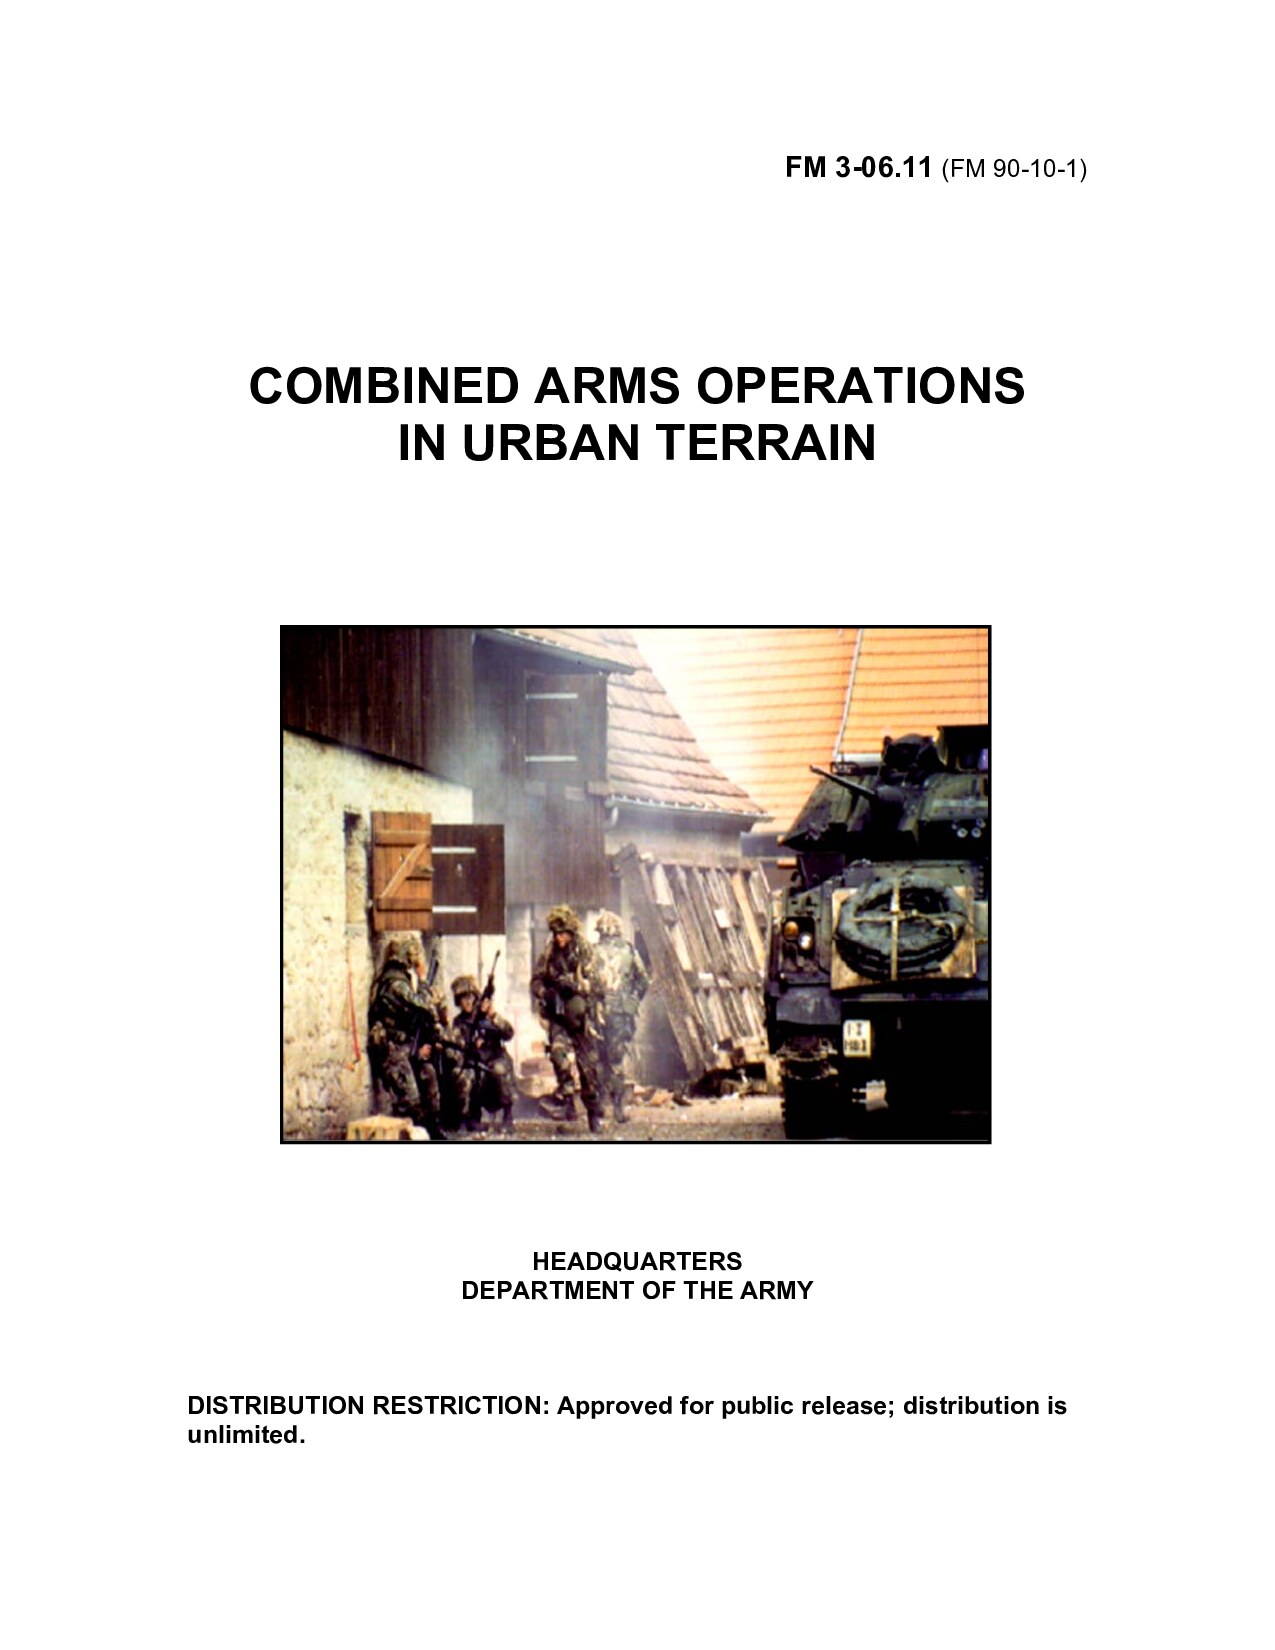 FM 3-06.11 Combined Arms Operations in Urban Terrain